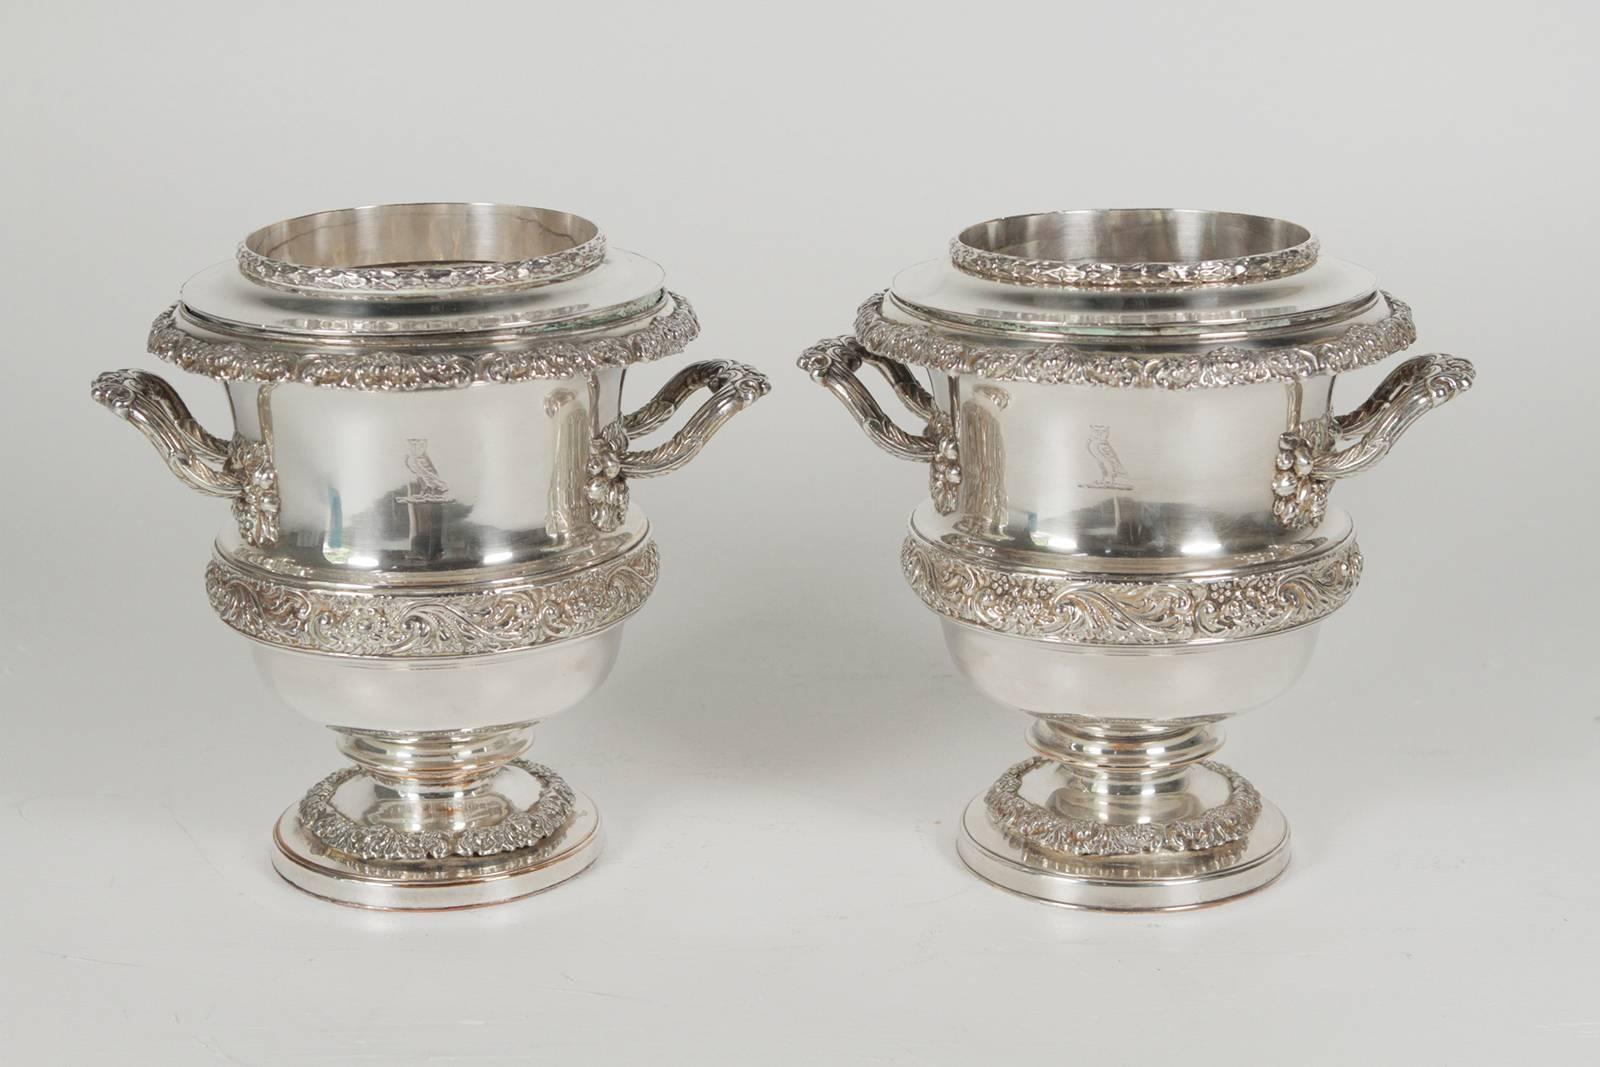 Early 19th Century Pair of Early Sheffield Plate Wine Coolers, England, circa 1820